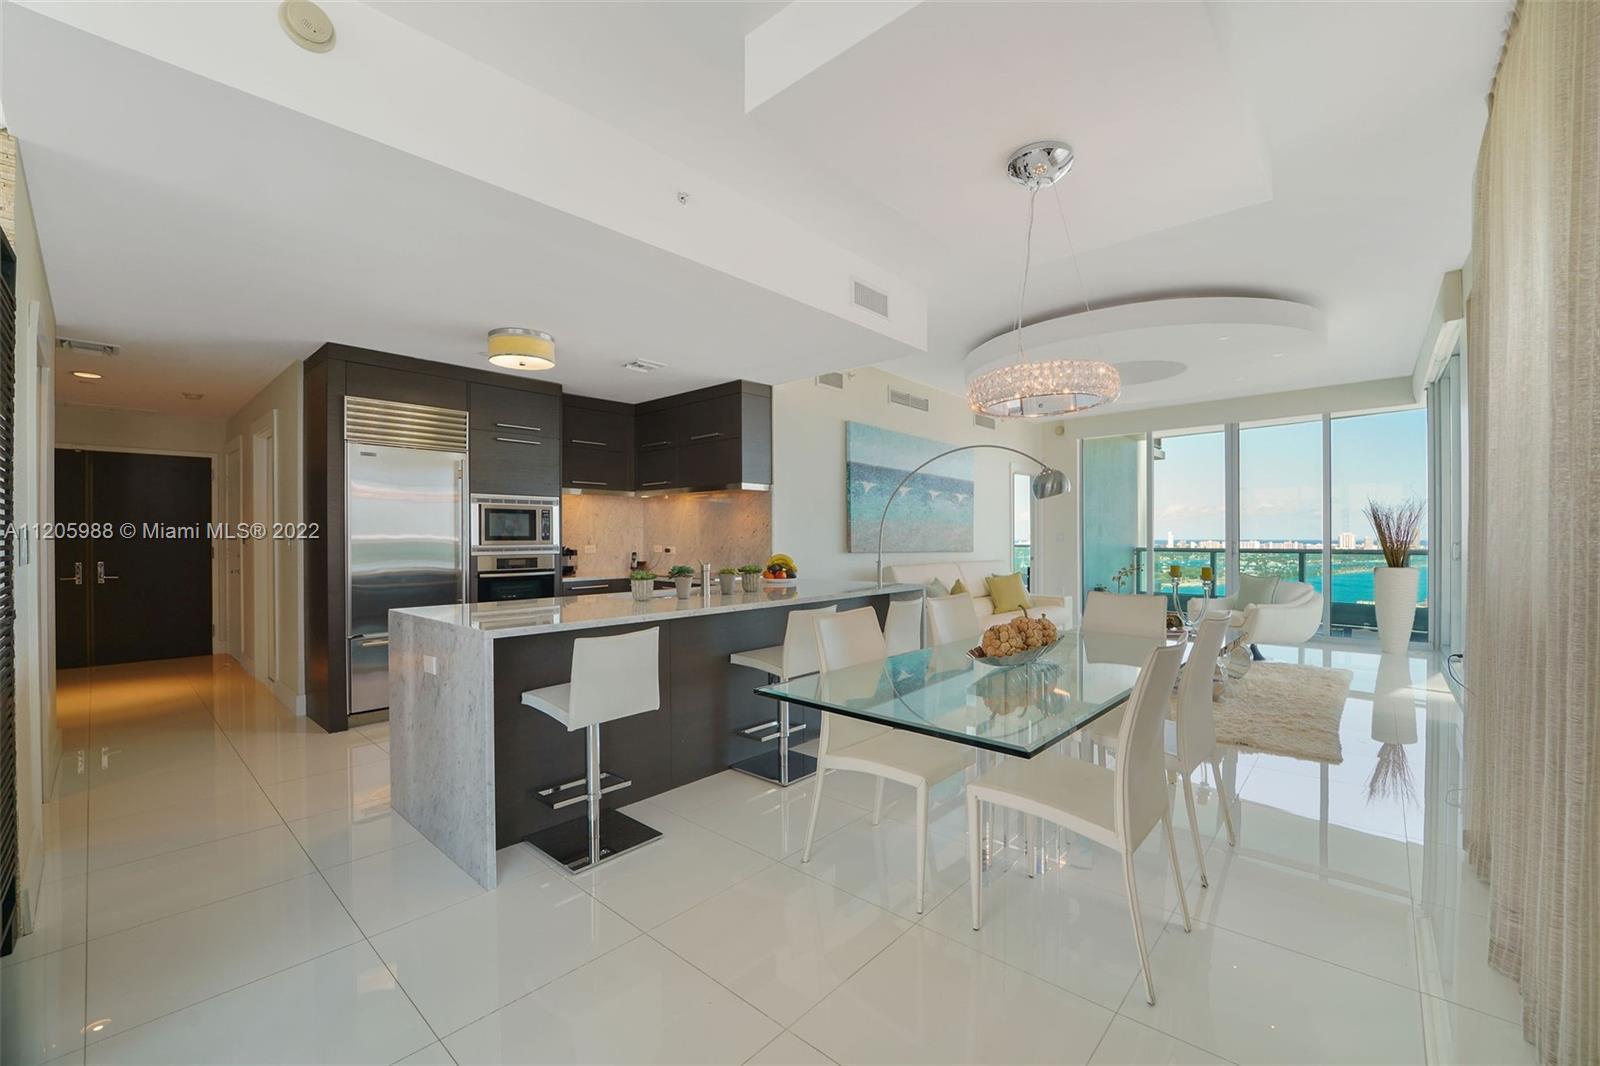 Unusual and spectacular one of a kind corner unit at 900 Biscayne Bay Tower.  Luxurious 3 bedrooms/ 